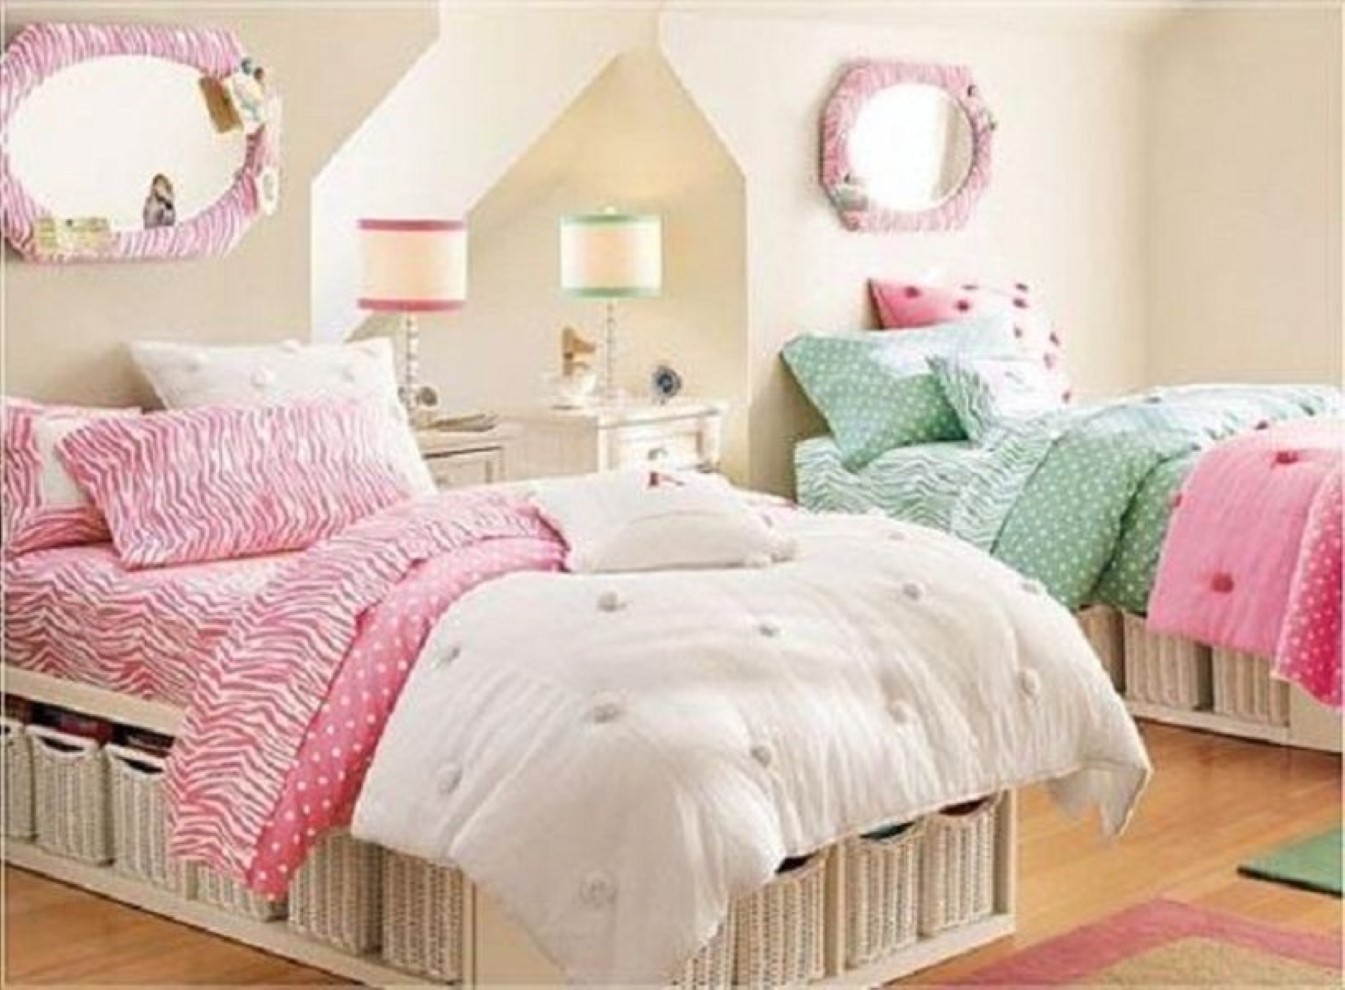 Twin Bedroom Catchy Appealing Twin Bedroom Sets With Catchy Bed Storage Ideas And Pink Zebra Pattern Wall Mirrors Bedroom Creative Twin Bedroom Sets Ideas That Overflow With Style